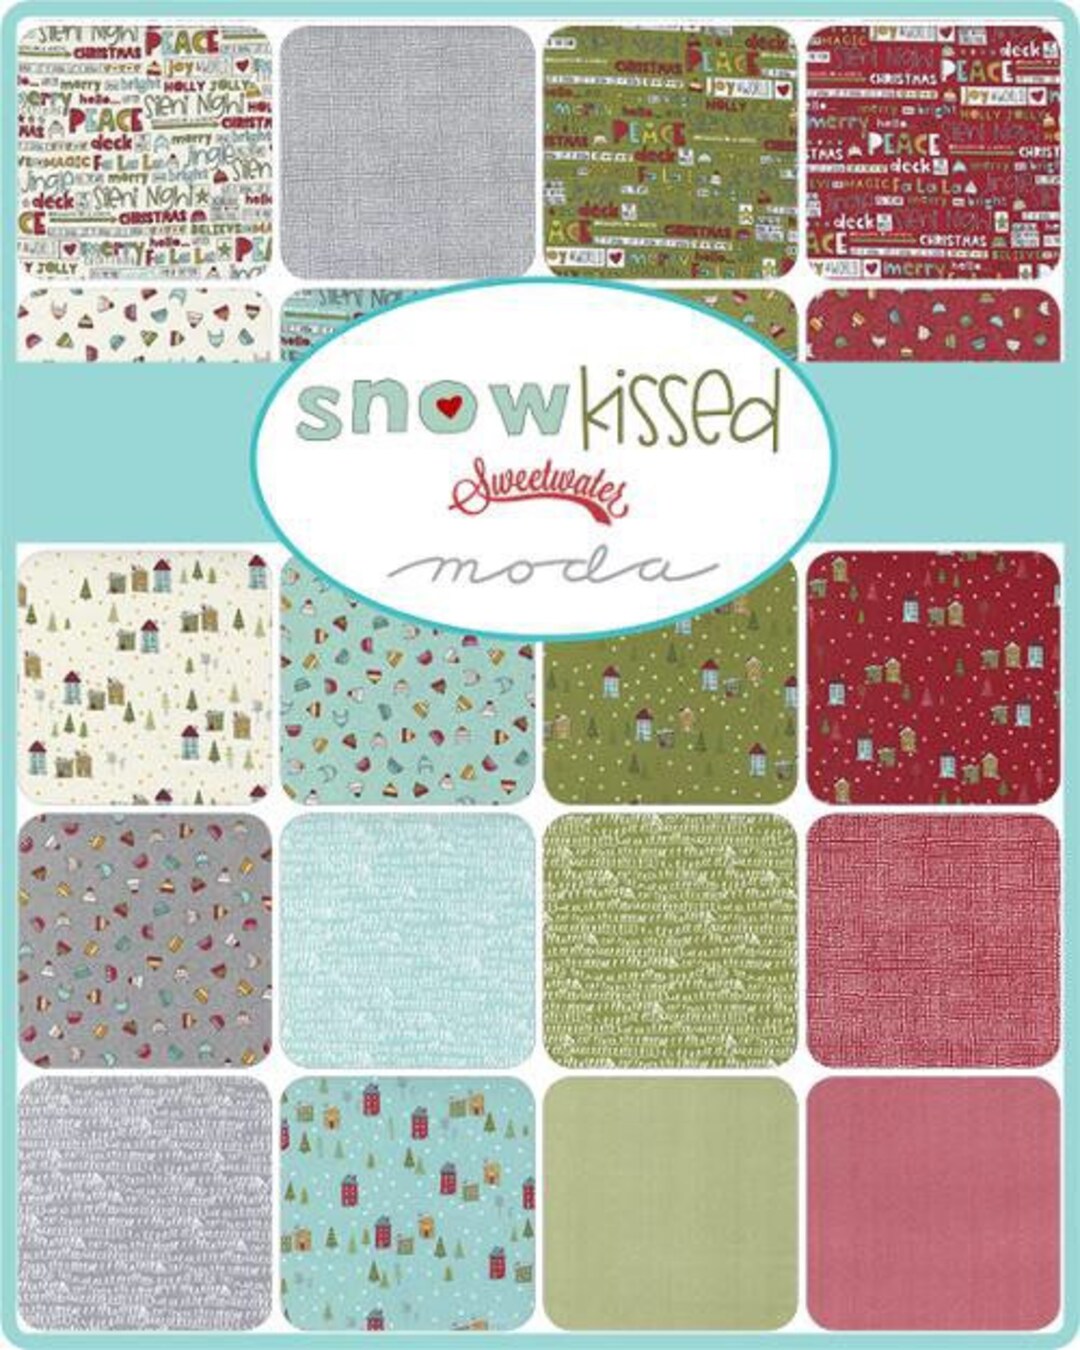 Snow Kissed Jelly Roll - Etsy